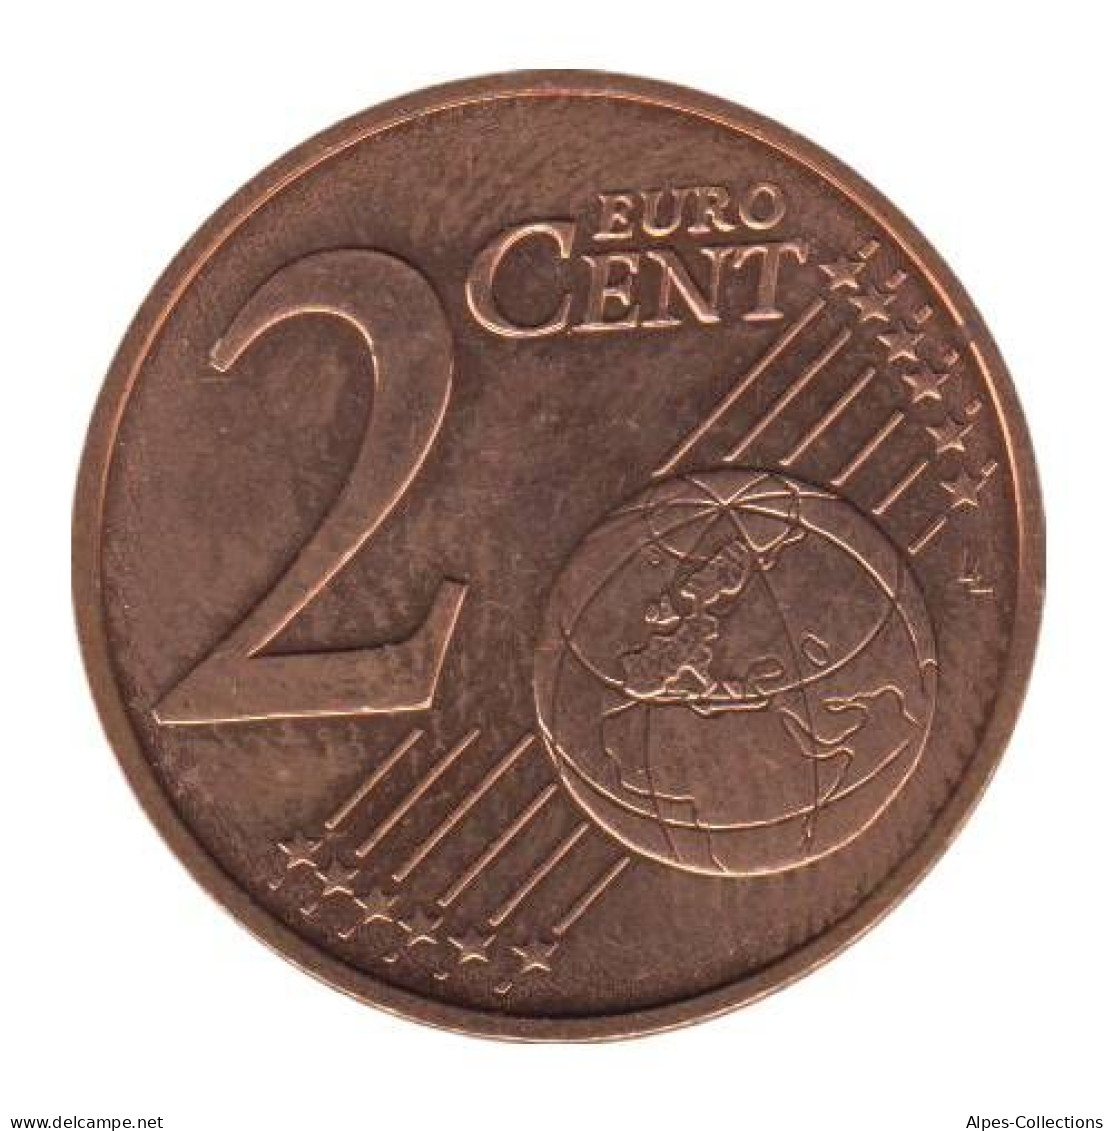 CH00210.1 - CHYPRE - 2 Cents D'euro - 2010 - Cyprus